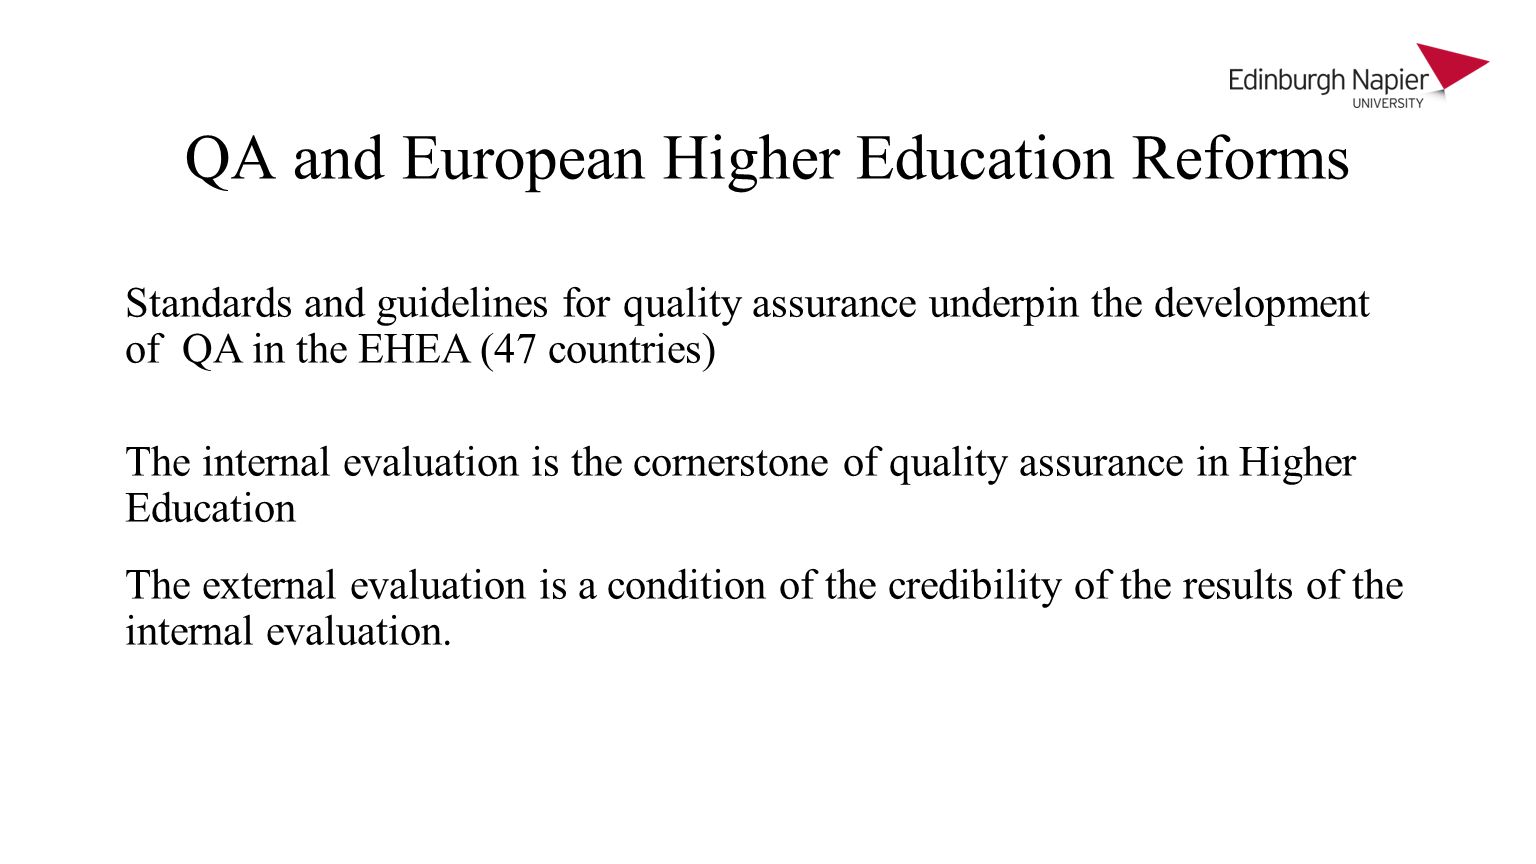 QA and European Higher Education Reforms Standards and guidelines for quality assurance underpin the development of QA in the EHEA (47 countries) The internal evaluation is the cornerstone of quality assurance in Higher Education The external evaluation is a condition of the credibility of the results of the internal evaluation.